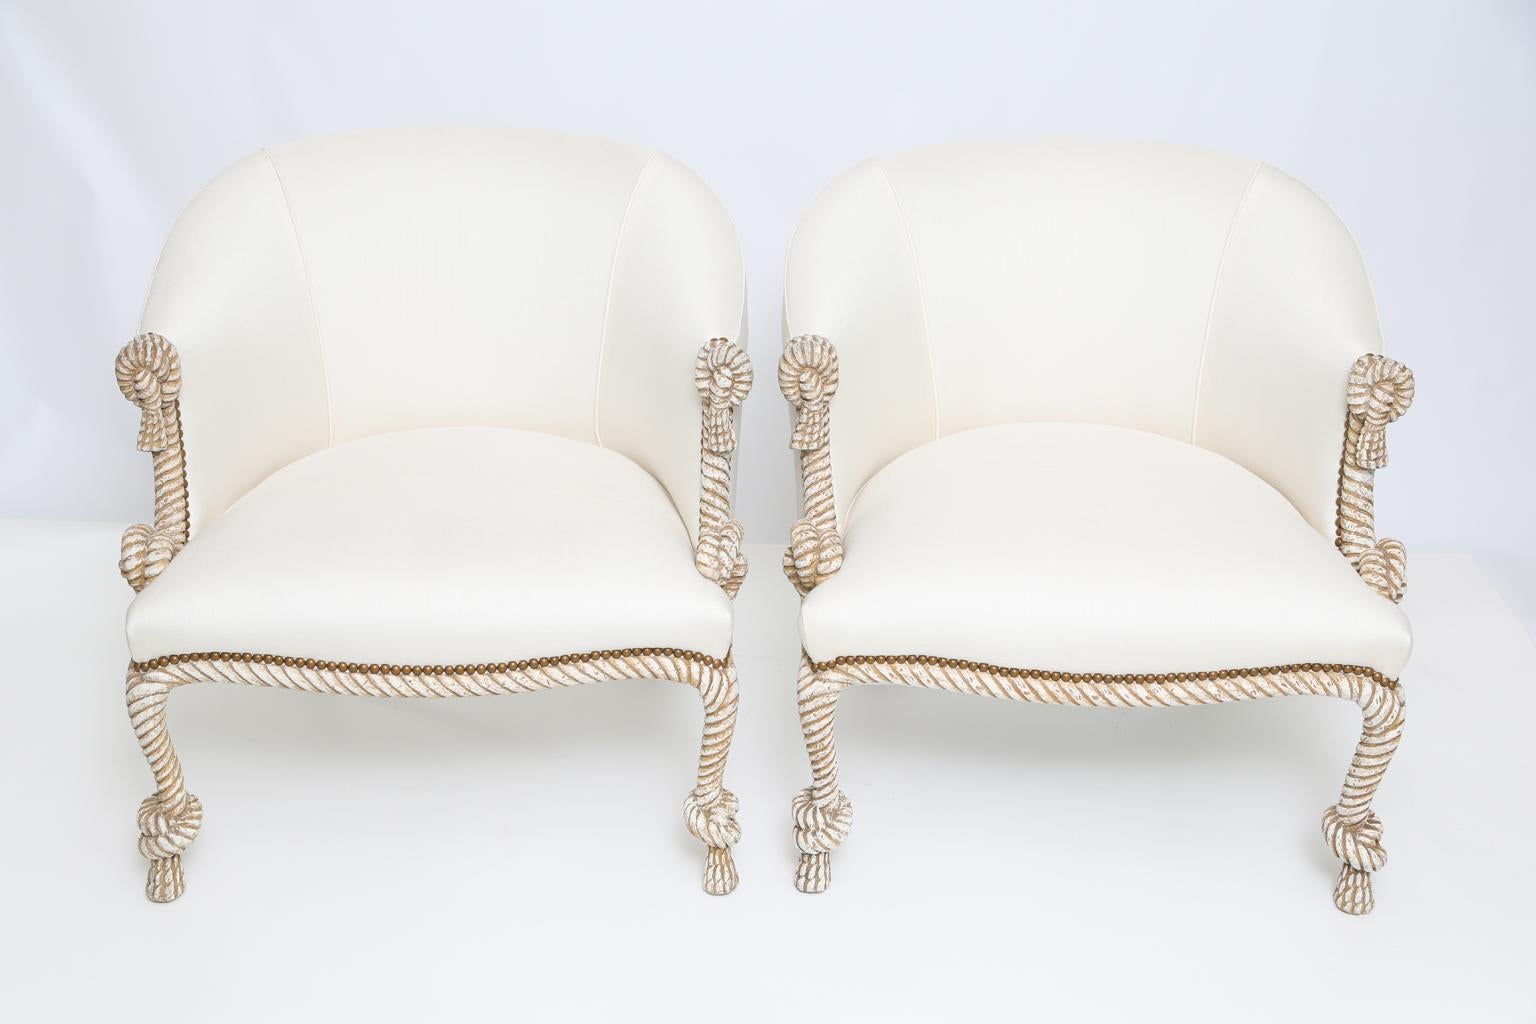 Pair of bergère armchairs, in the manner of AME Fournier (French, active after 1850), having a painted finish showing natural wear, each frame of wood carved to resemble rope, with knots on arms, and above each tassel foot, upholstered rounded back